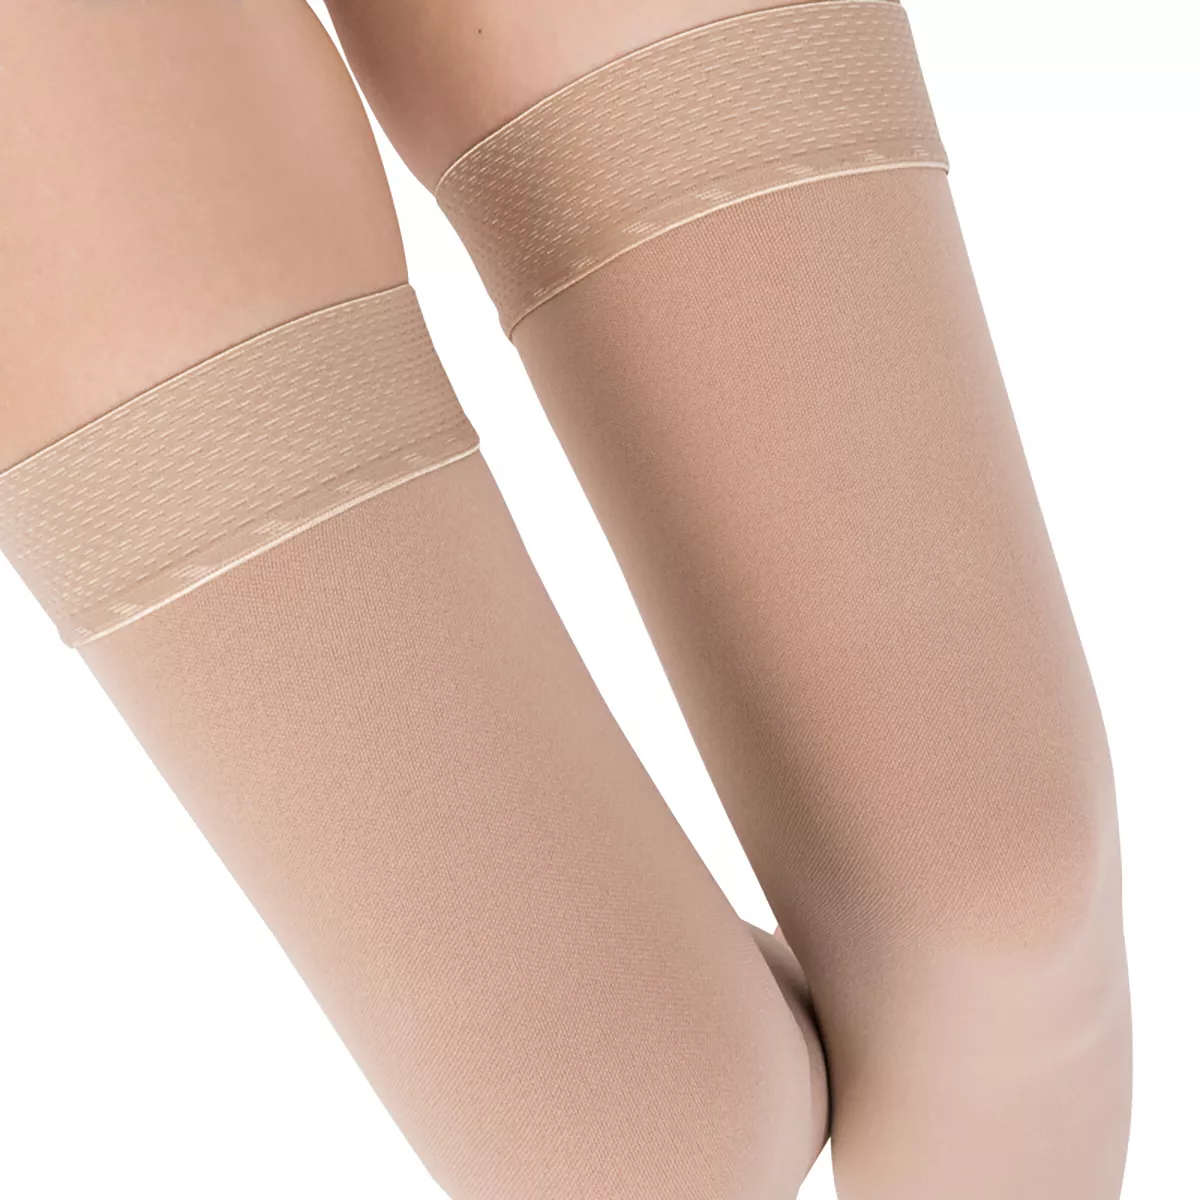  Thigh High Compression Stocking Footless - Pair, Thigh